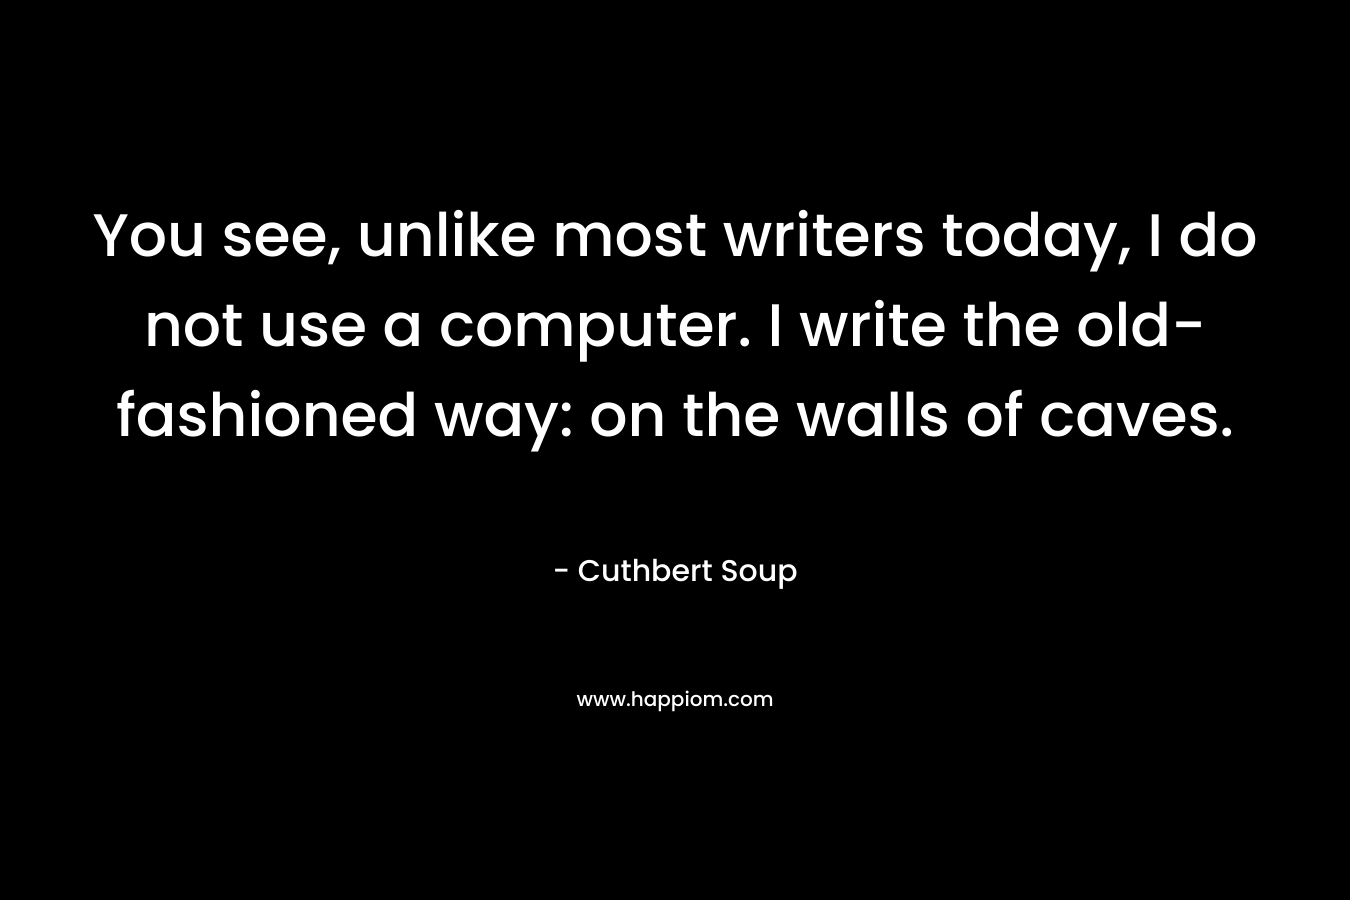 You see, unlike most writers today, I do not use a computer. I write the old-fashioned way: on the walls of caves.